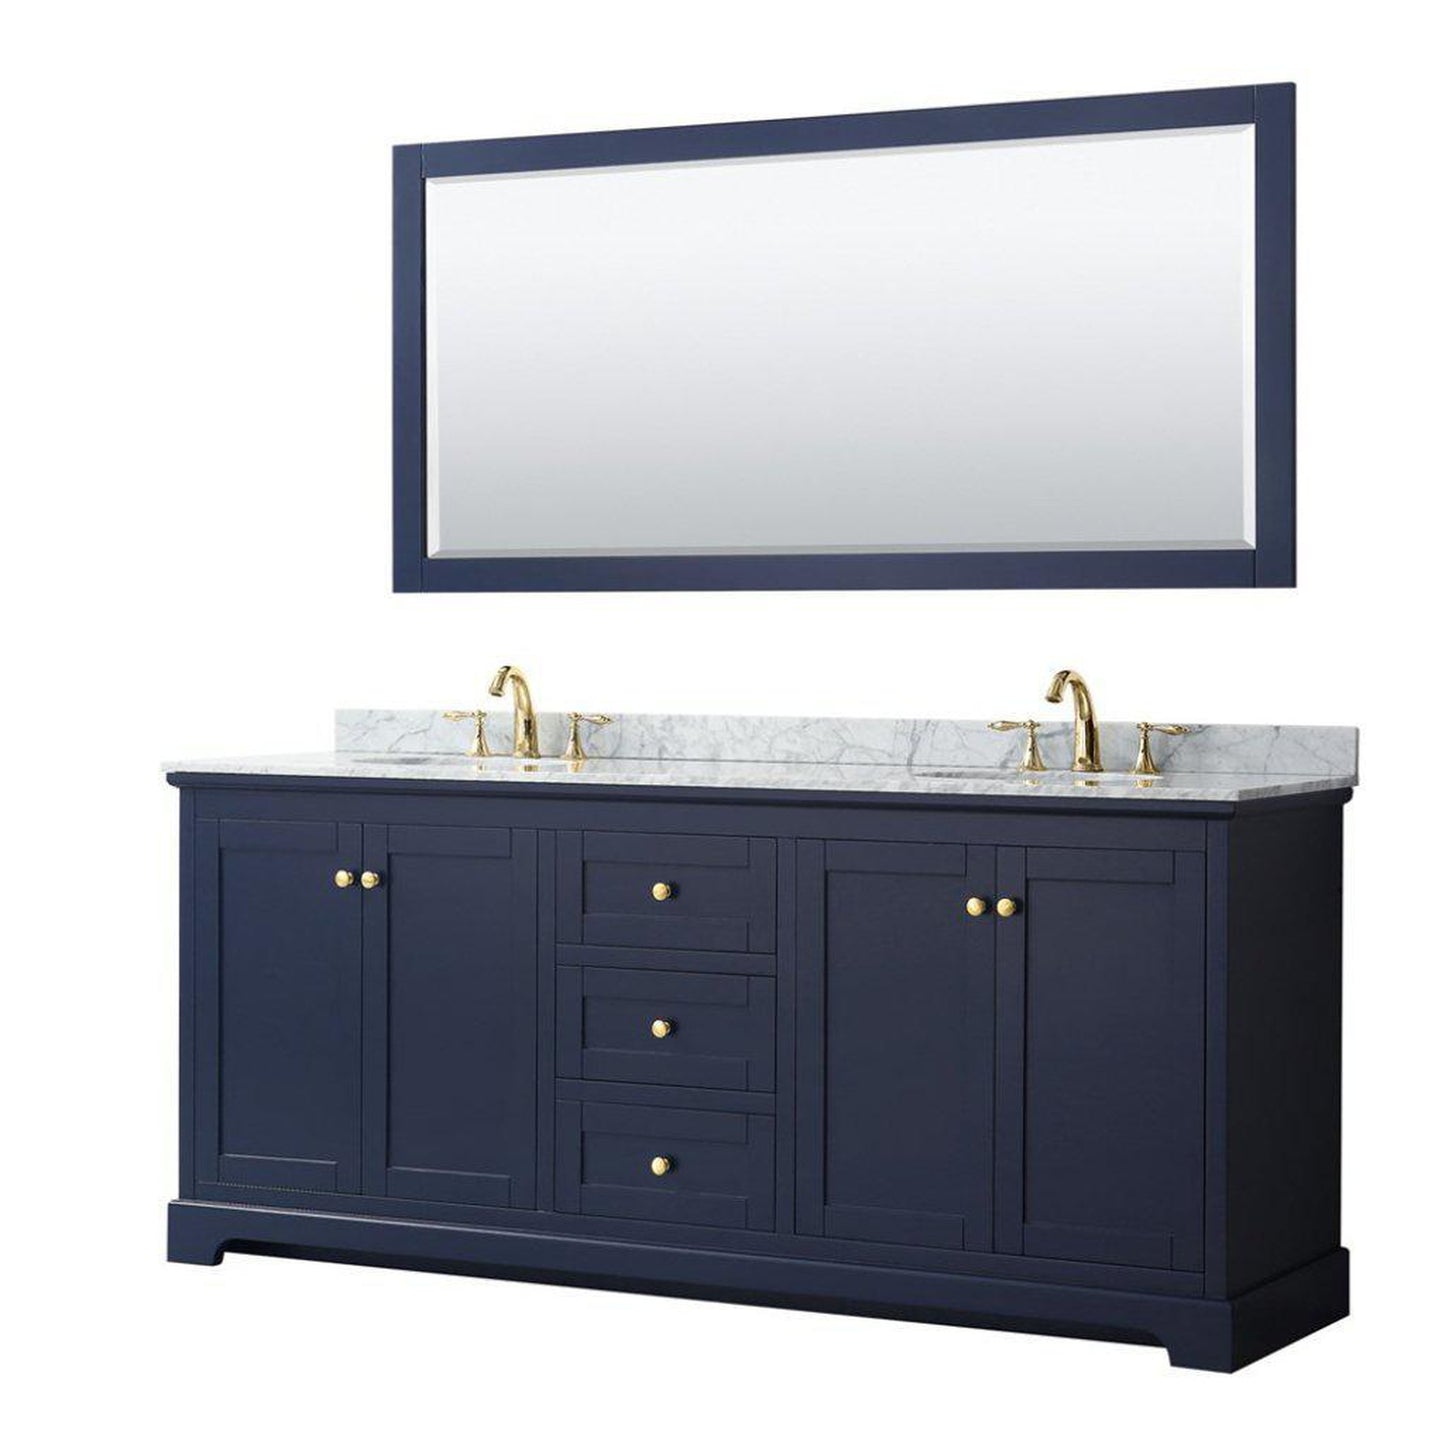 Wyndham Collection Avery 80" Dark Blue Double Bathroom Vanity Set With White Carrara Marble Countertop With 3-Hole Faucet And 8" Oval Sink And 70" Mirror